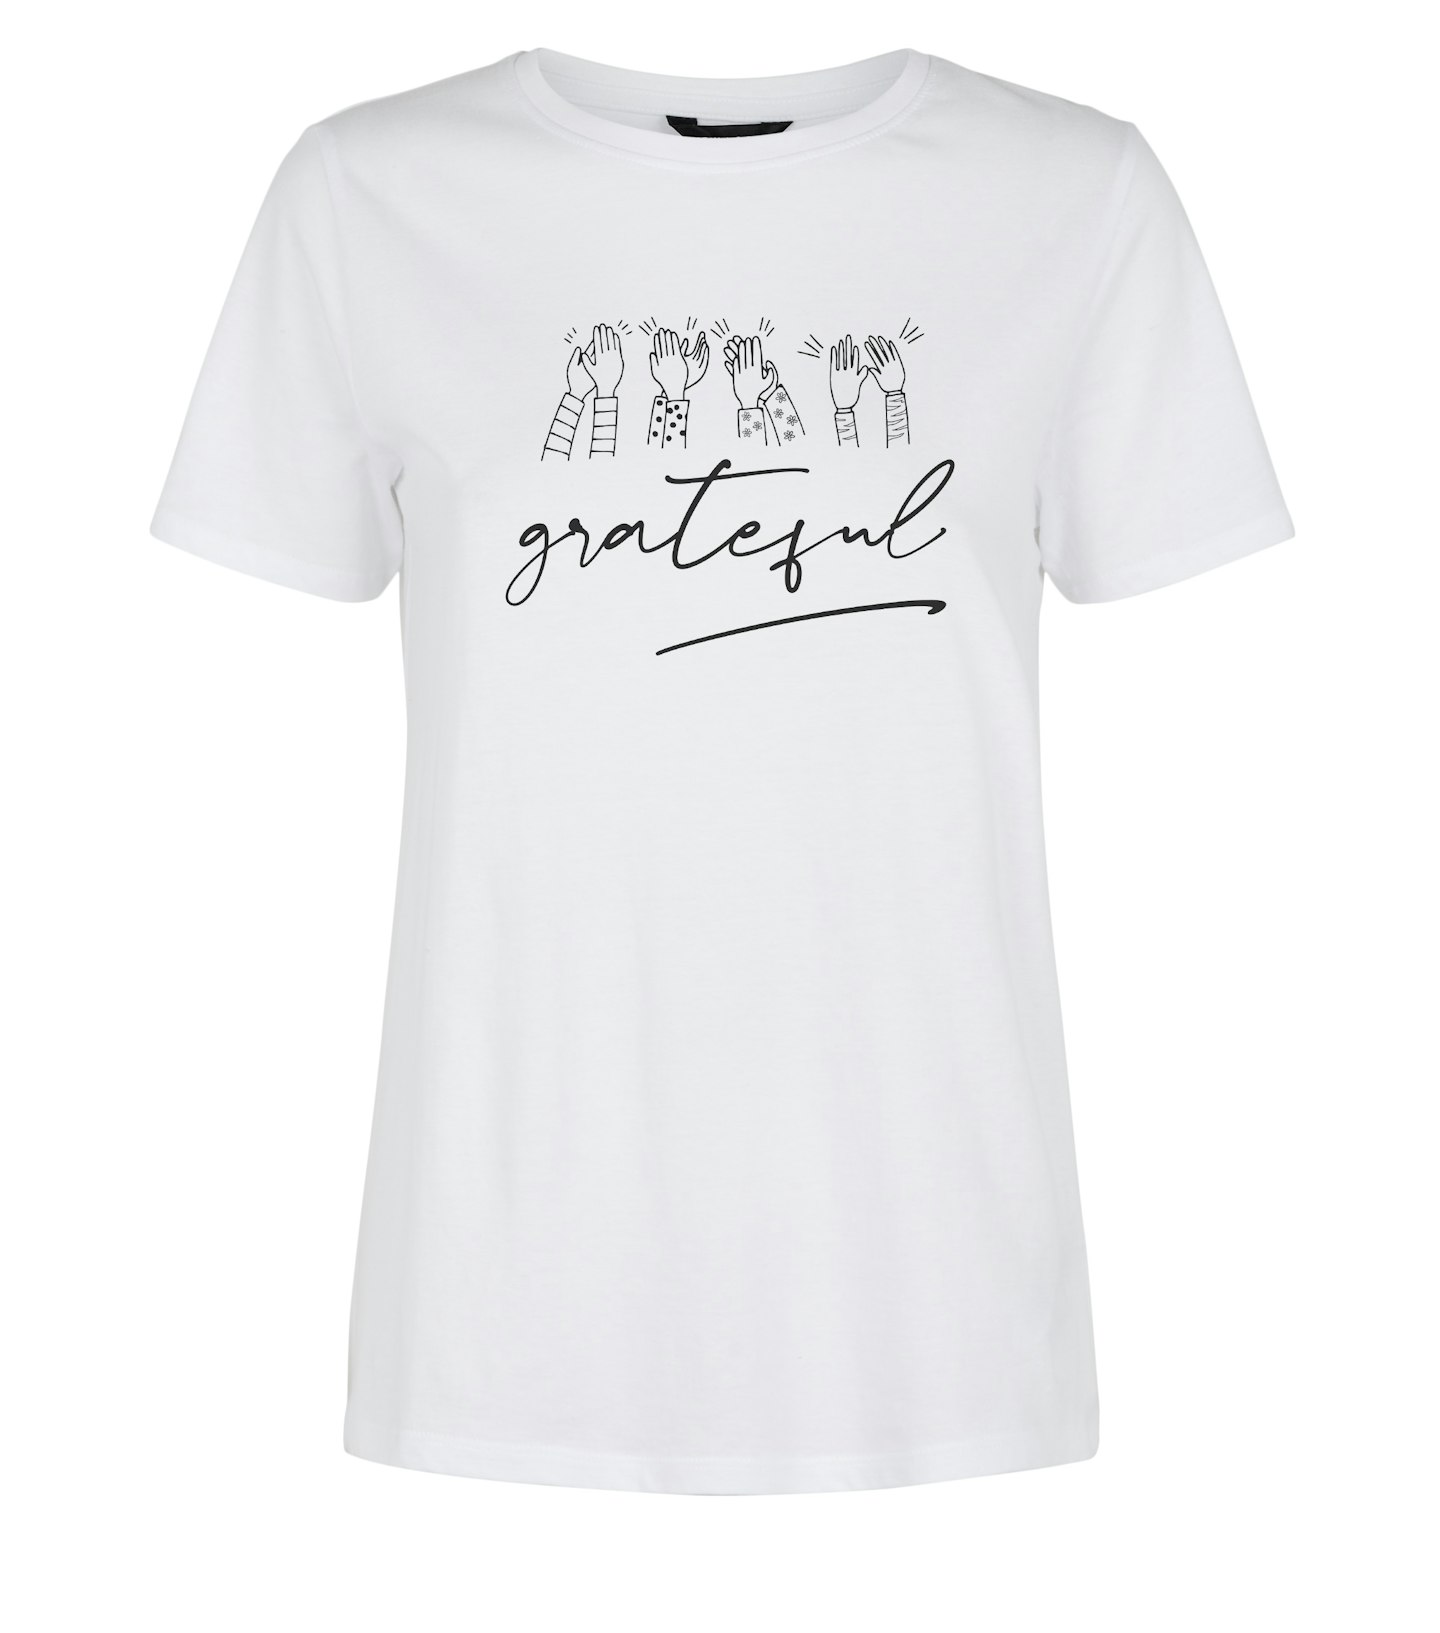 New Look, White Clapping Grateful Slogan Charity T-Shirt, £8.99